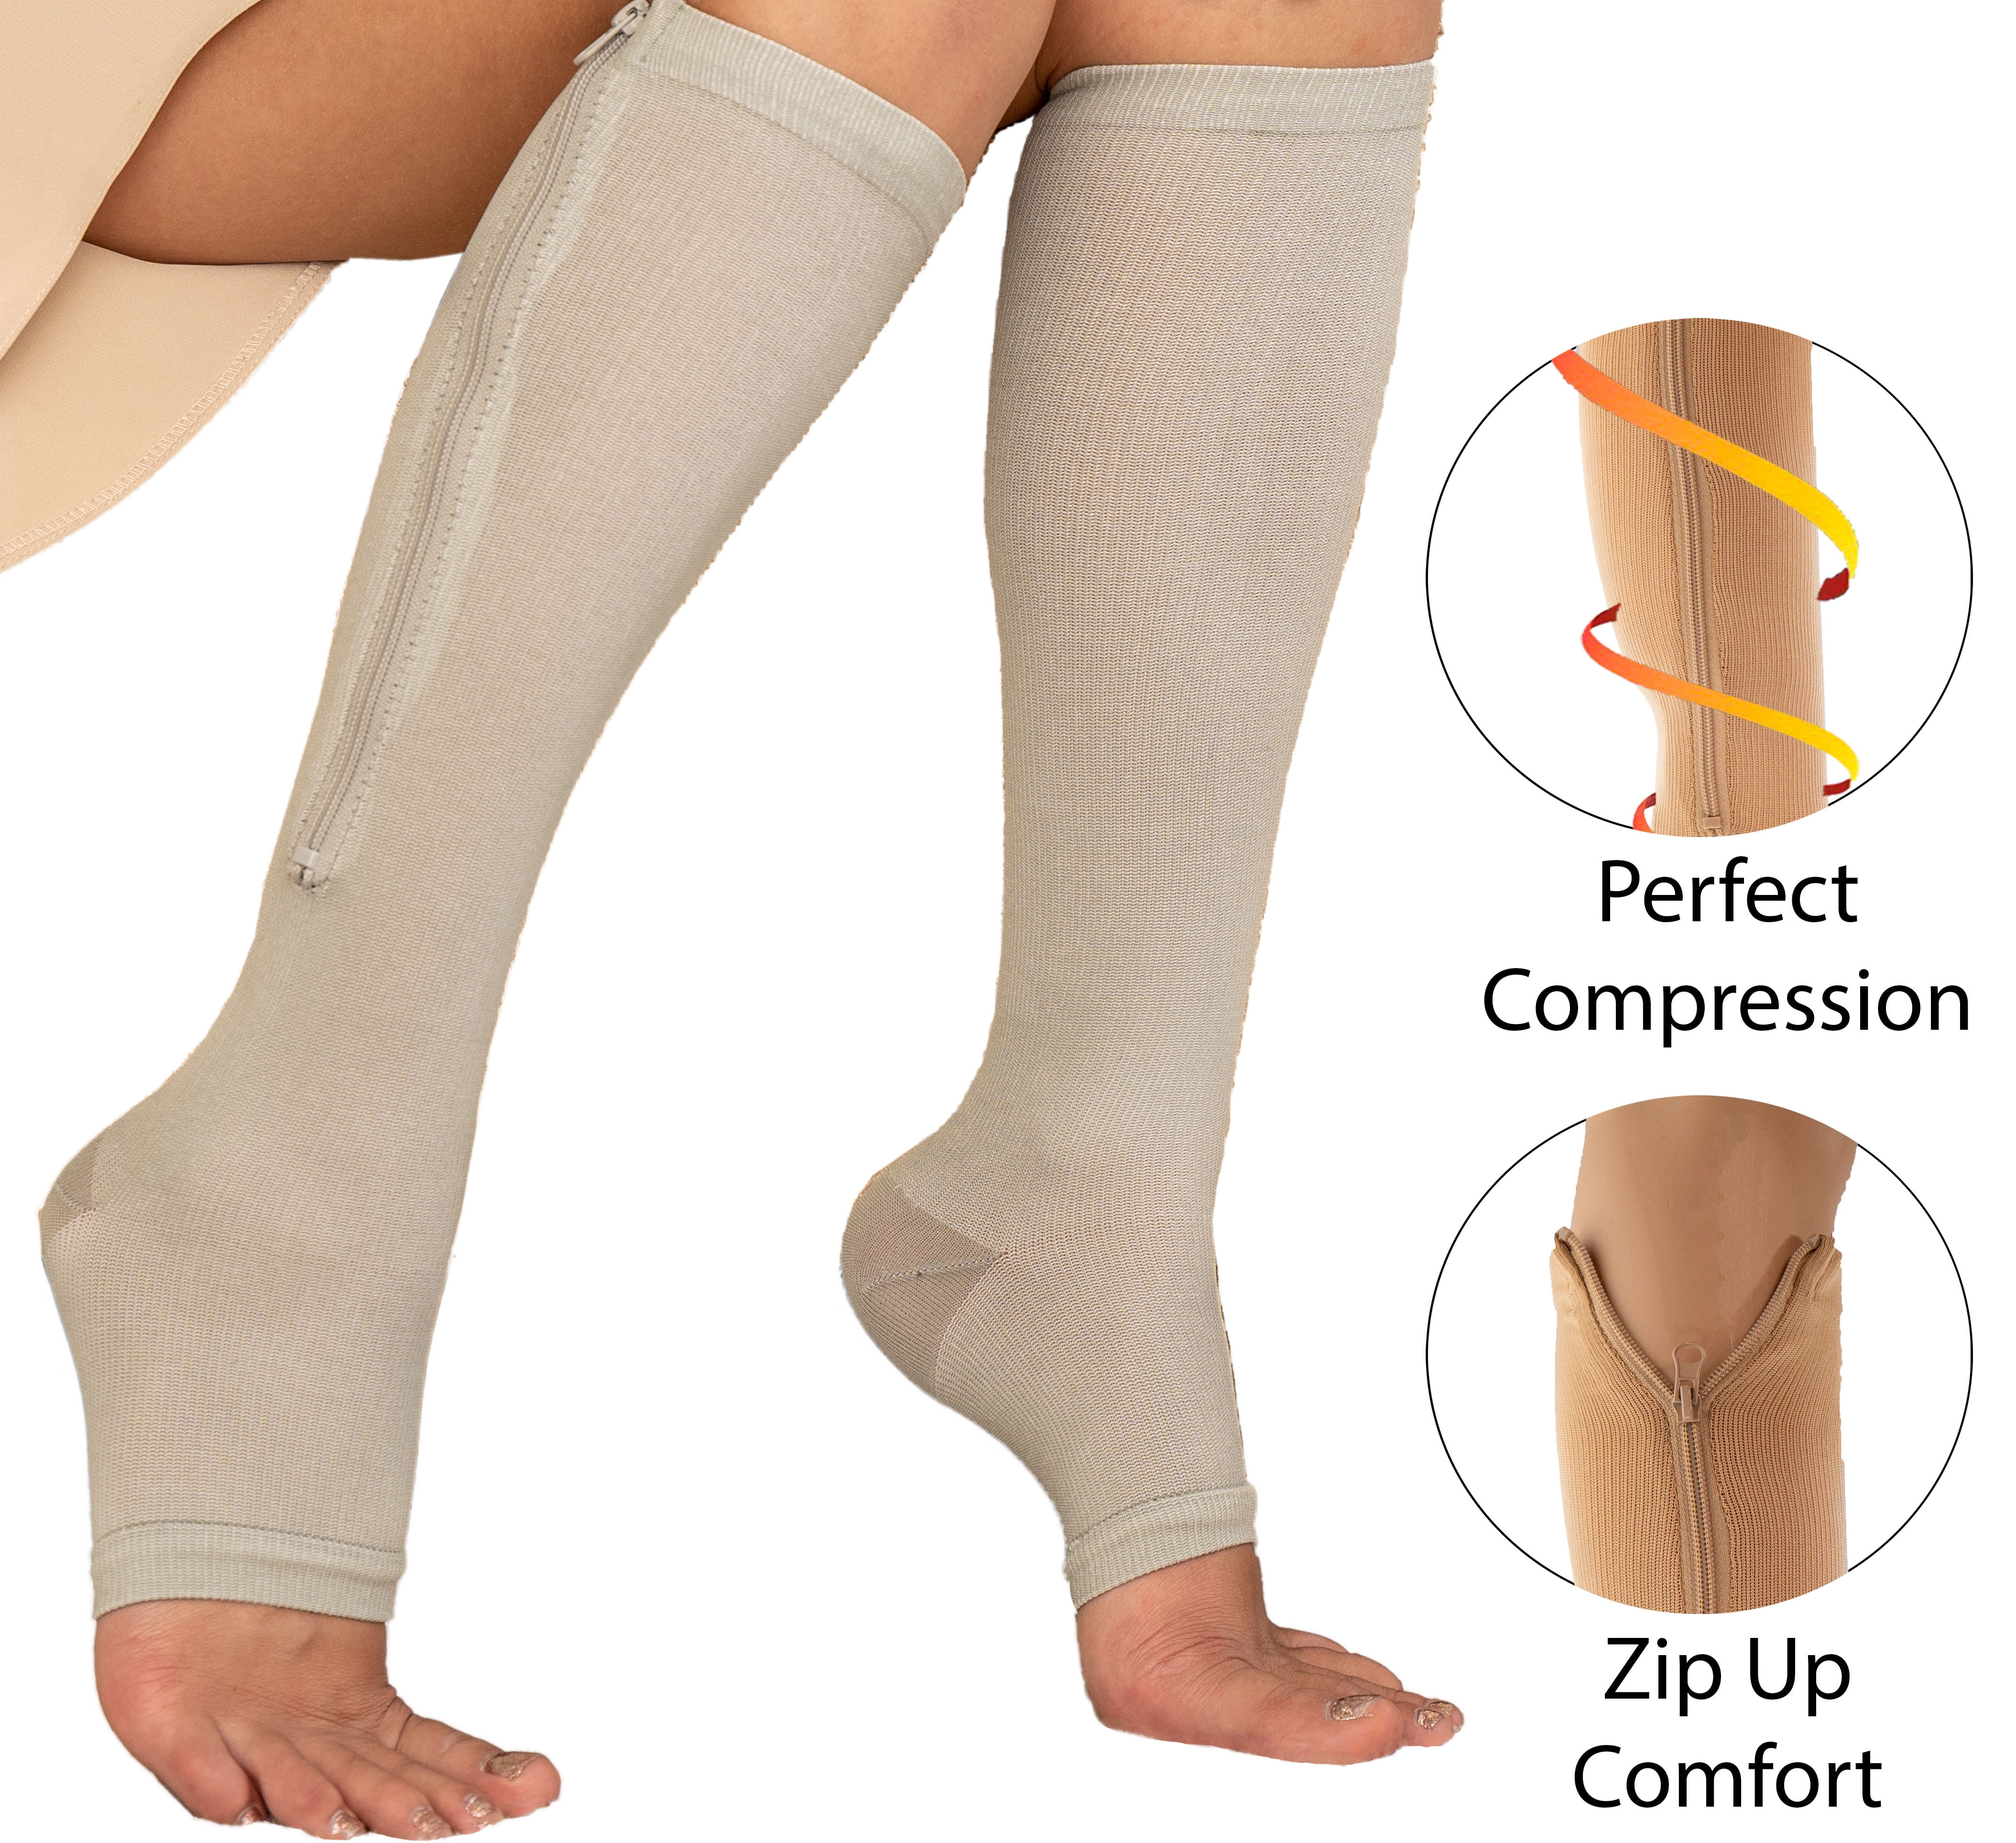 4 Pair of R Gear 12 to 18mmHG Compression Socks Large 